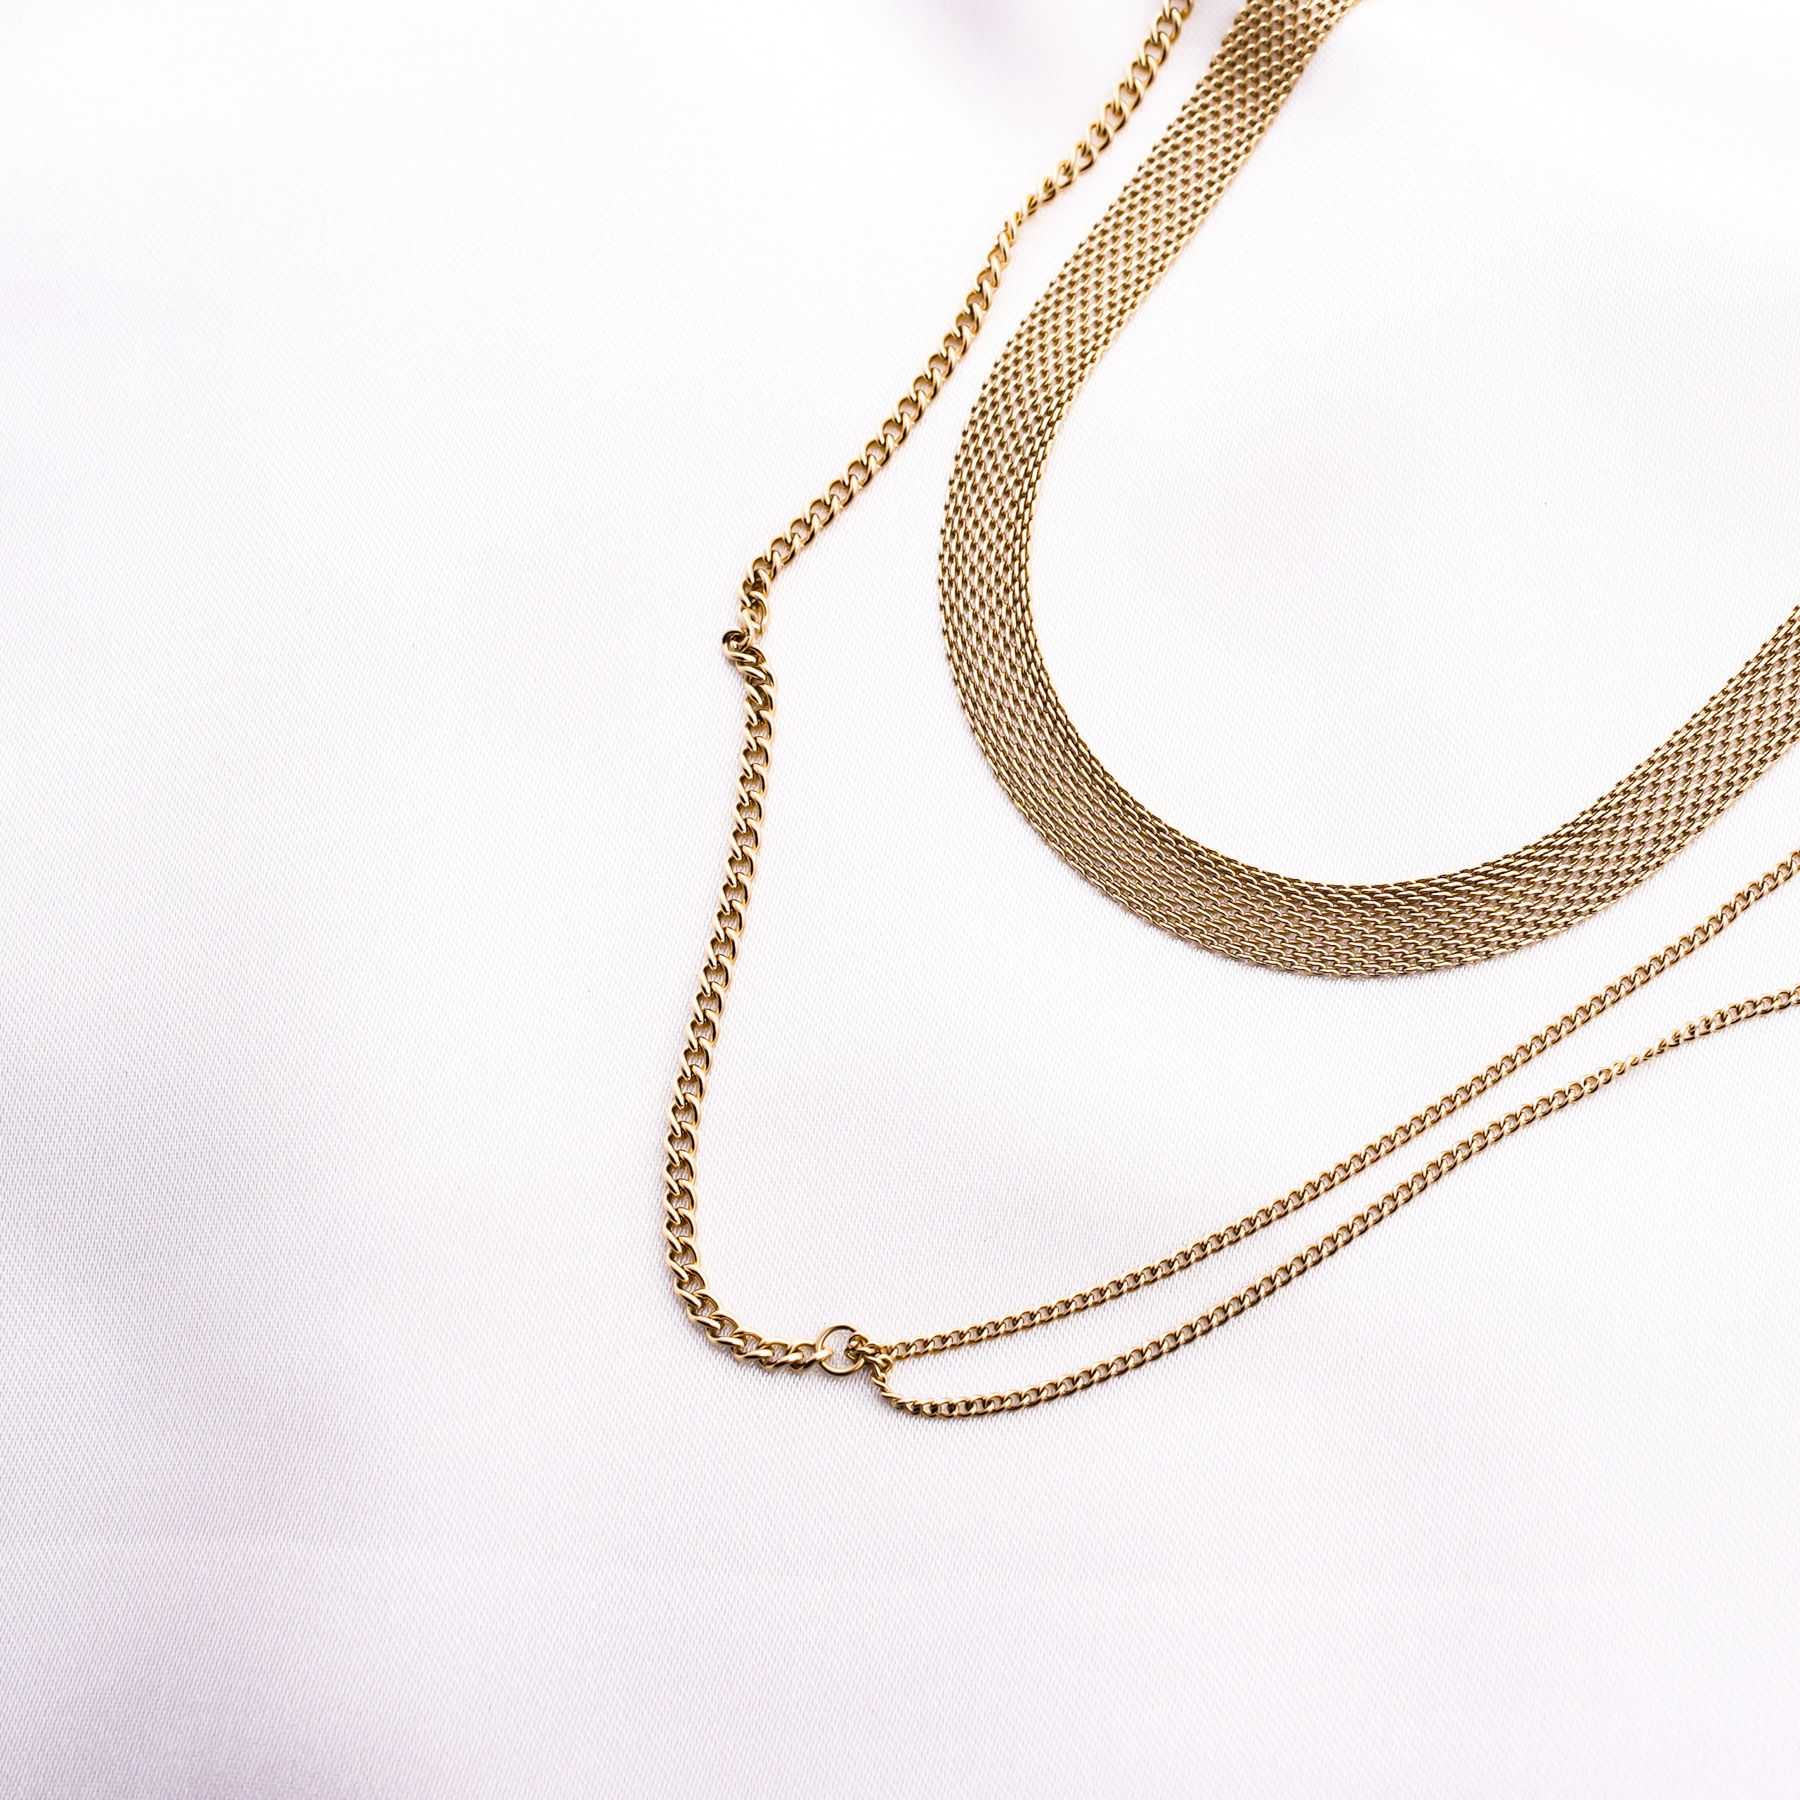 LEGACY CHOKER & DOUBLE NECKLACE - GOLD 